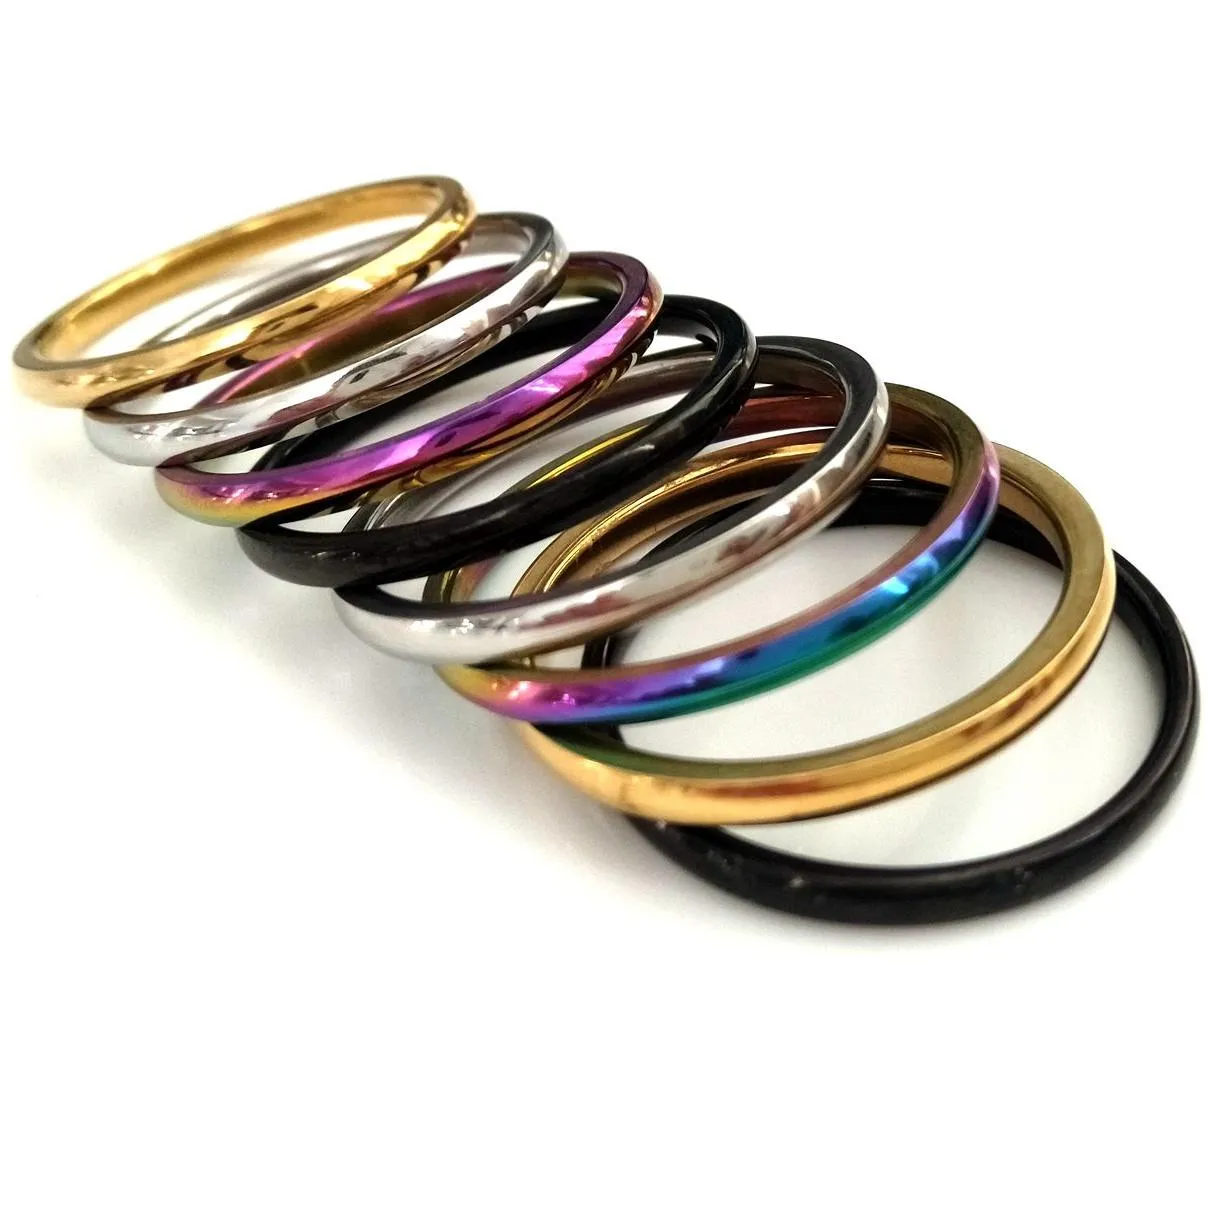 50pcs width 2mm gold/silver/black/rainbow mix stainless steel band ring comfort-fit wedding engagement classic ring unisex jewelry